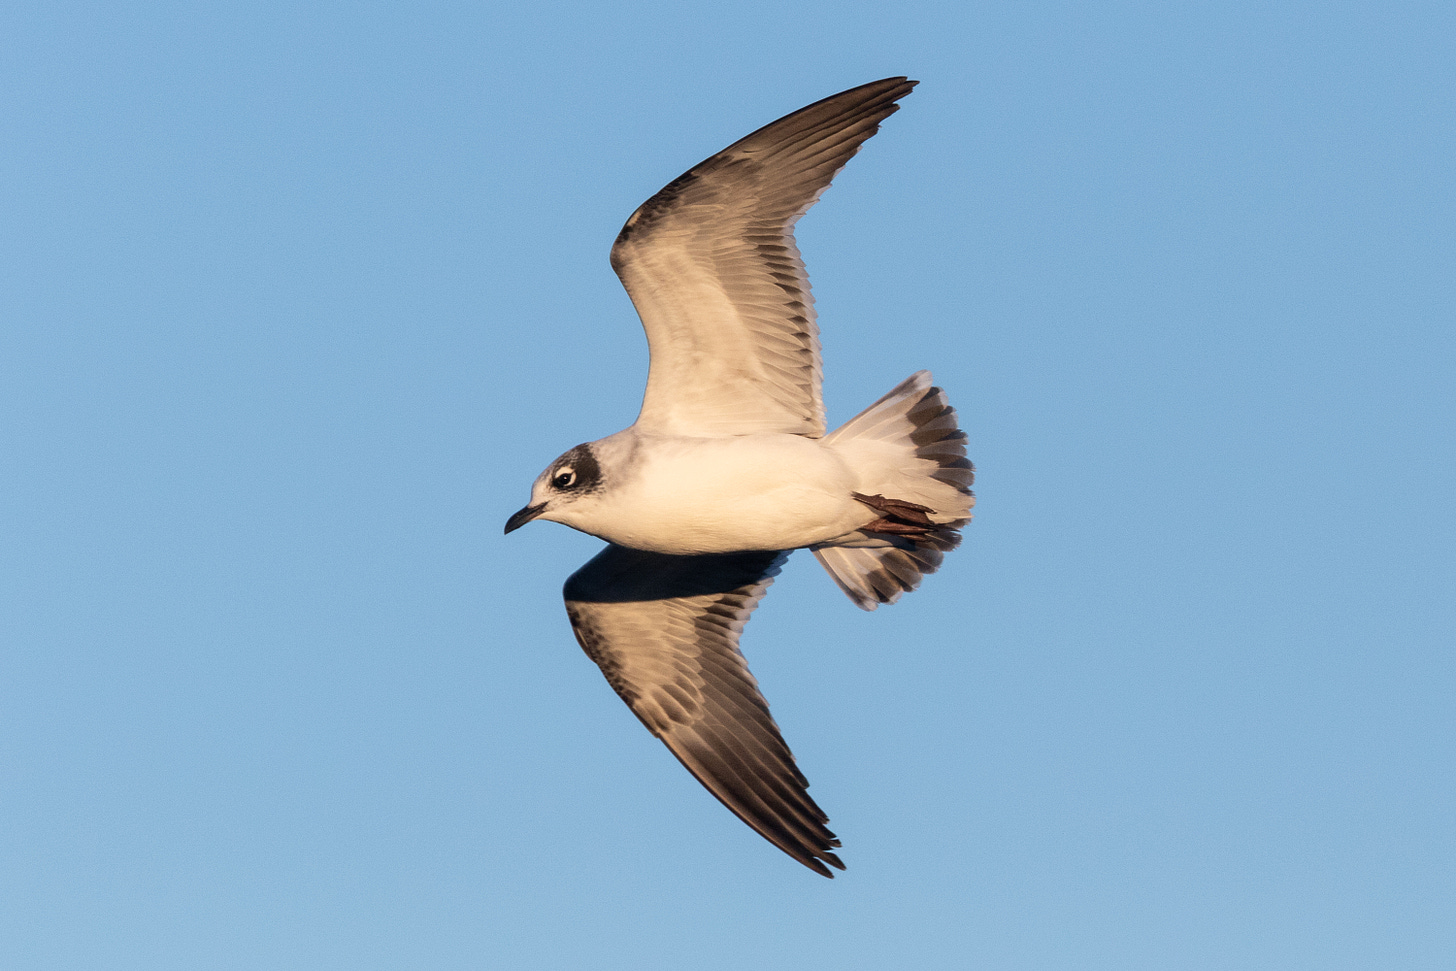 a white bird with long, pointed, black-tipped wings, a band of black across its tail feathers, and a black cap with bright white arcs over and under its eyes, flying with wings outstretched against a blue sky